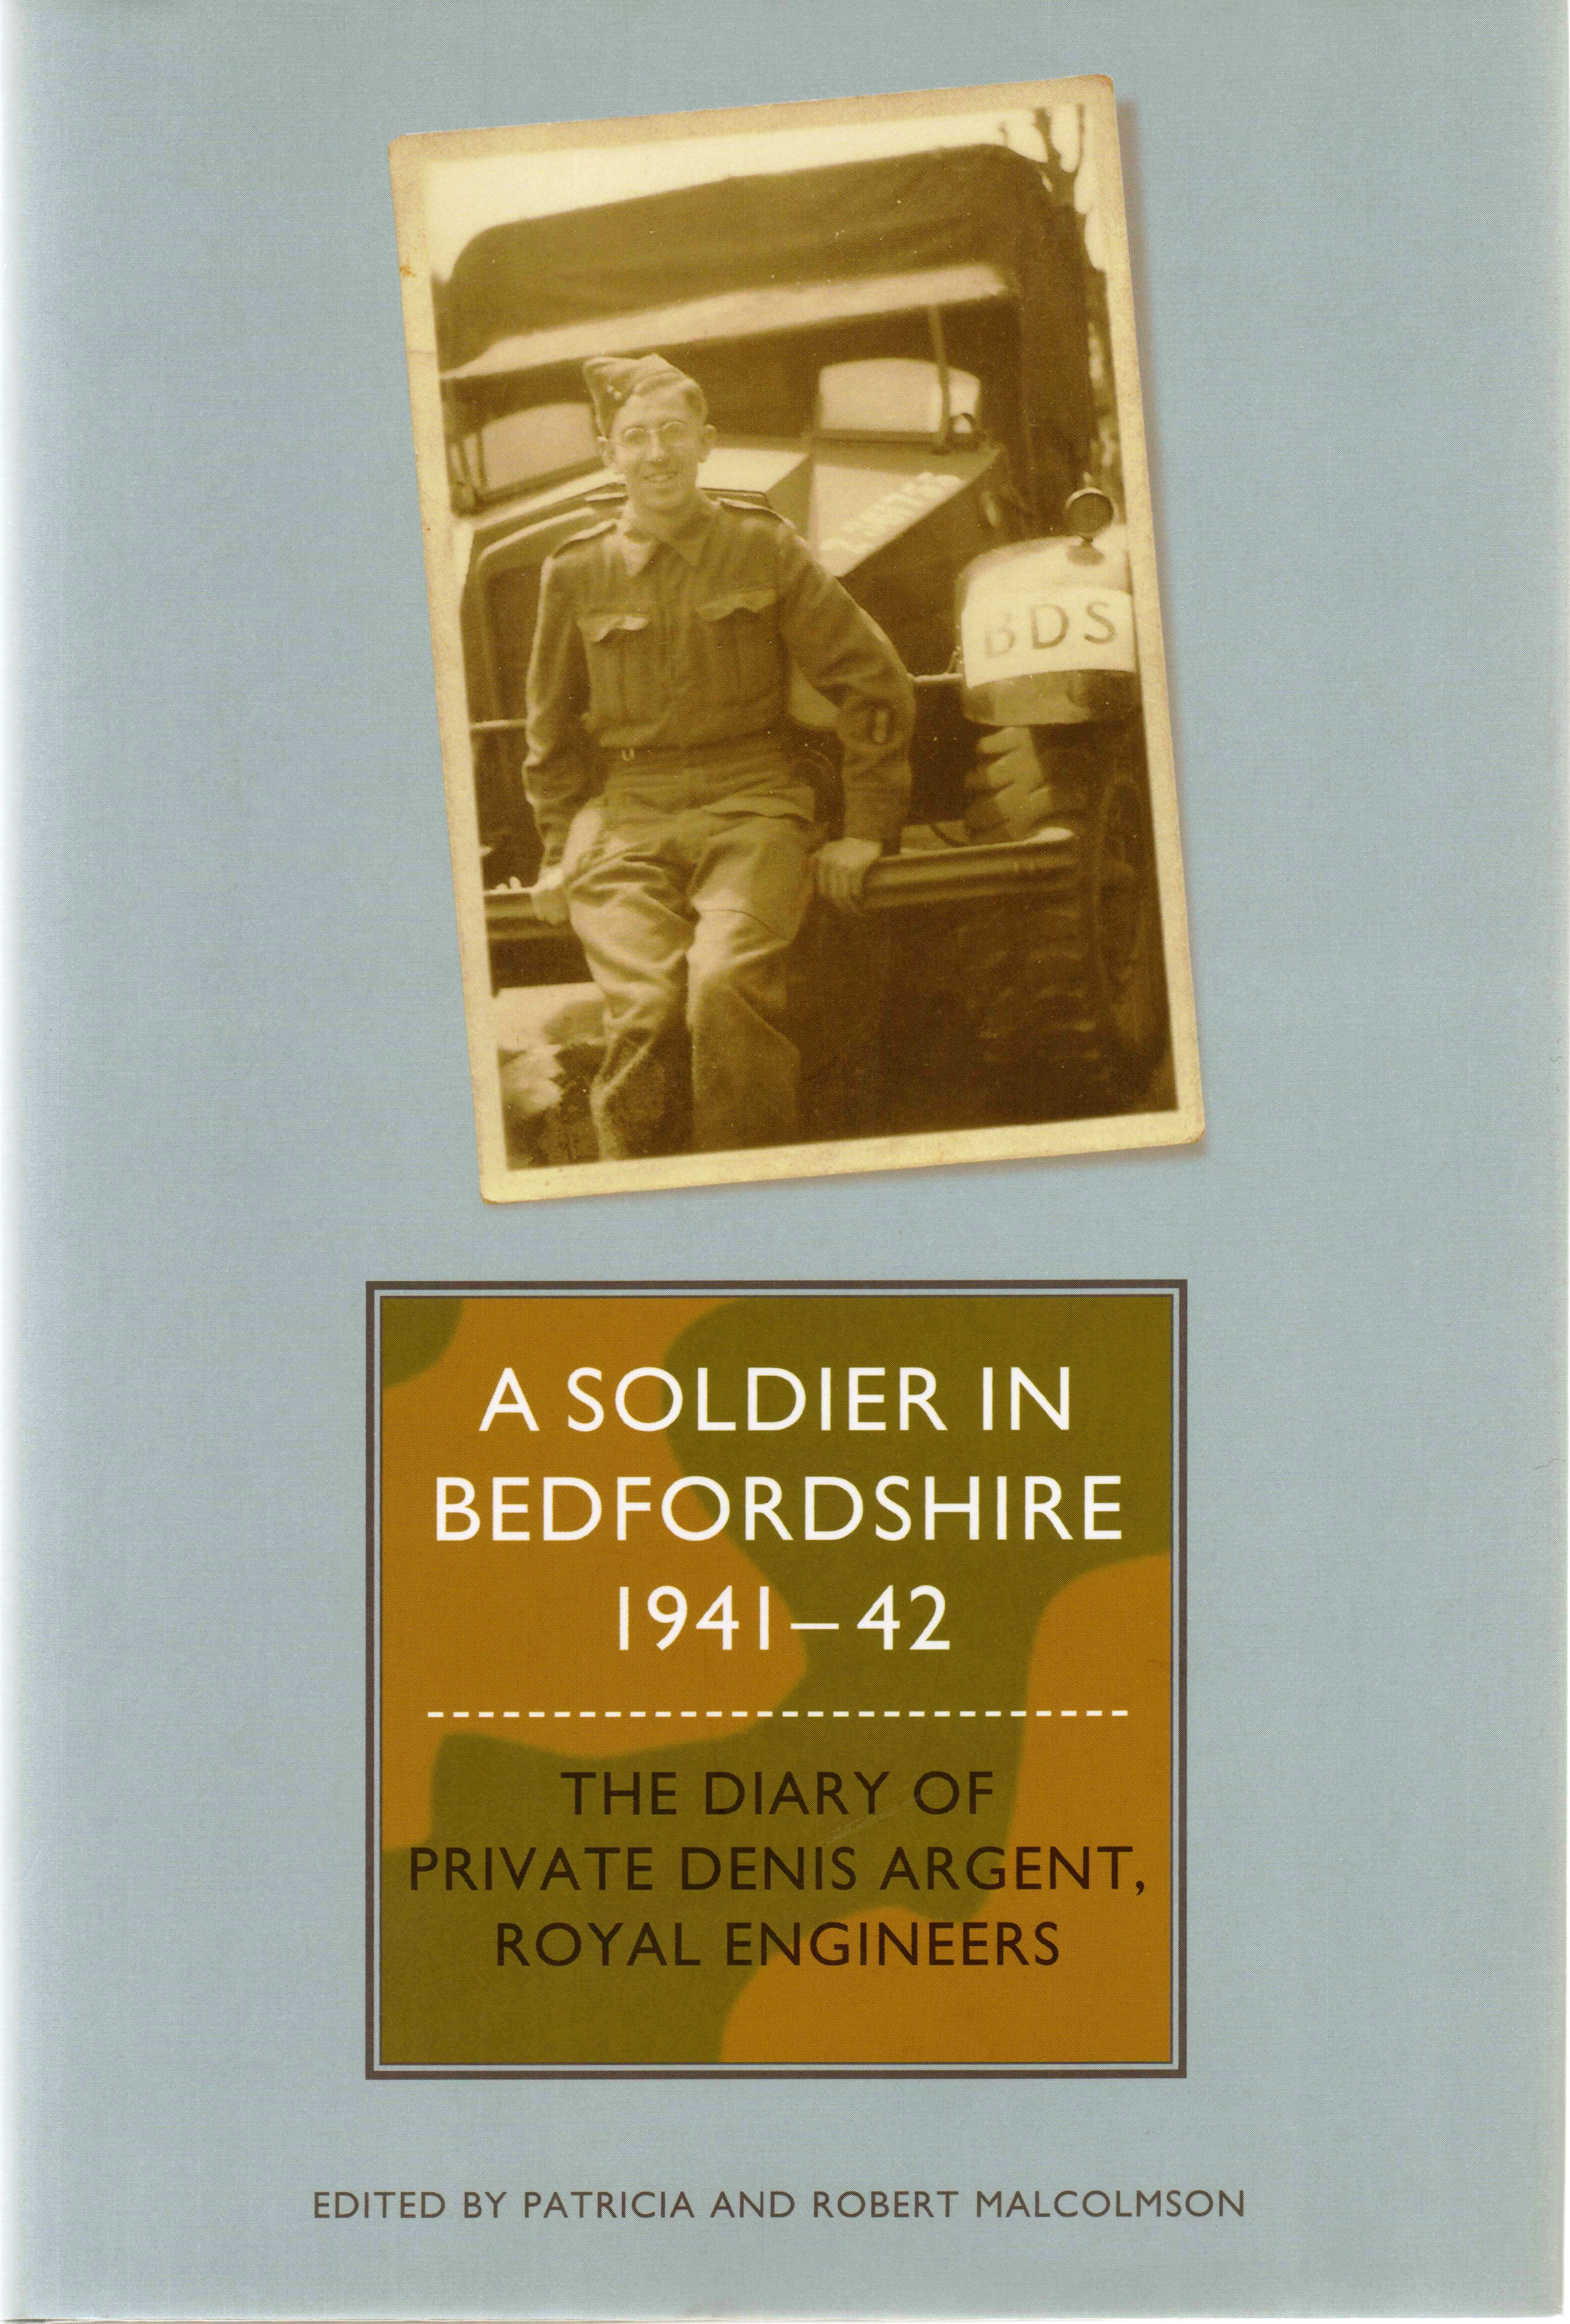 A soldier in Bedfordshire, 1941-1942